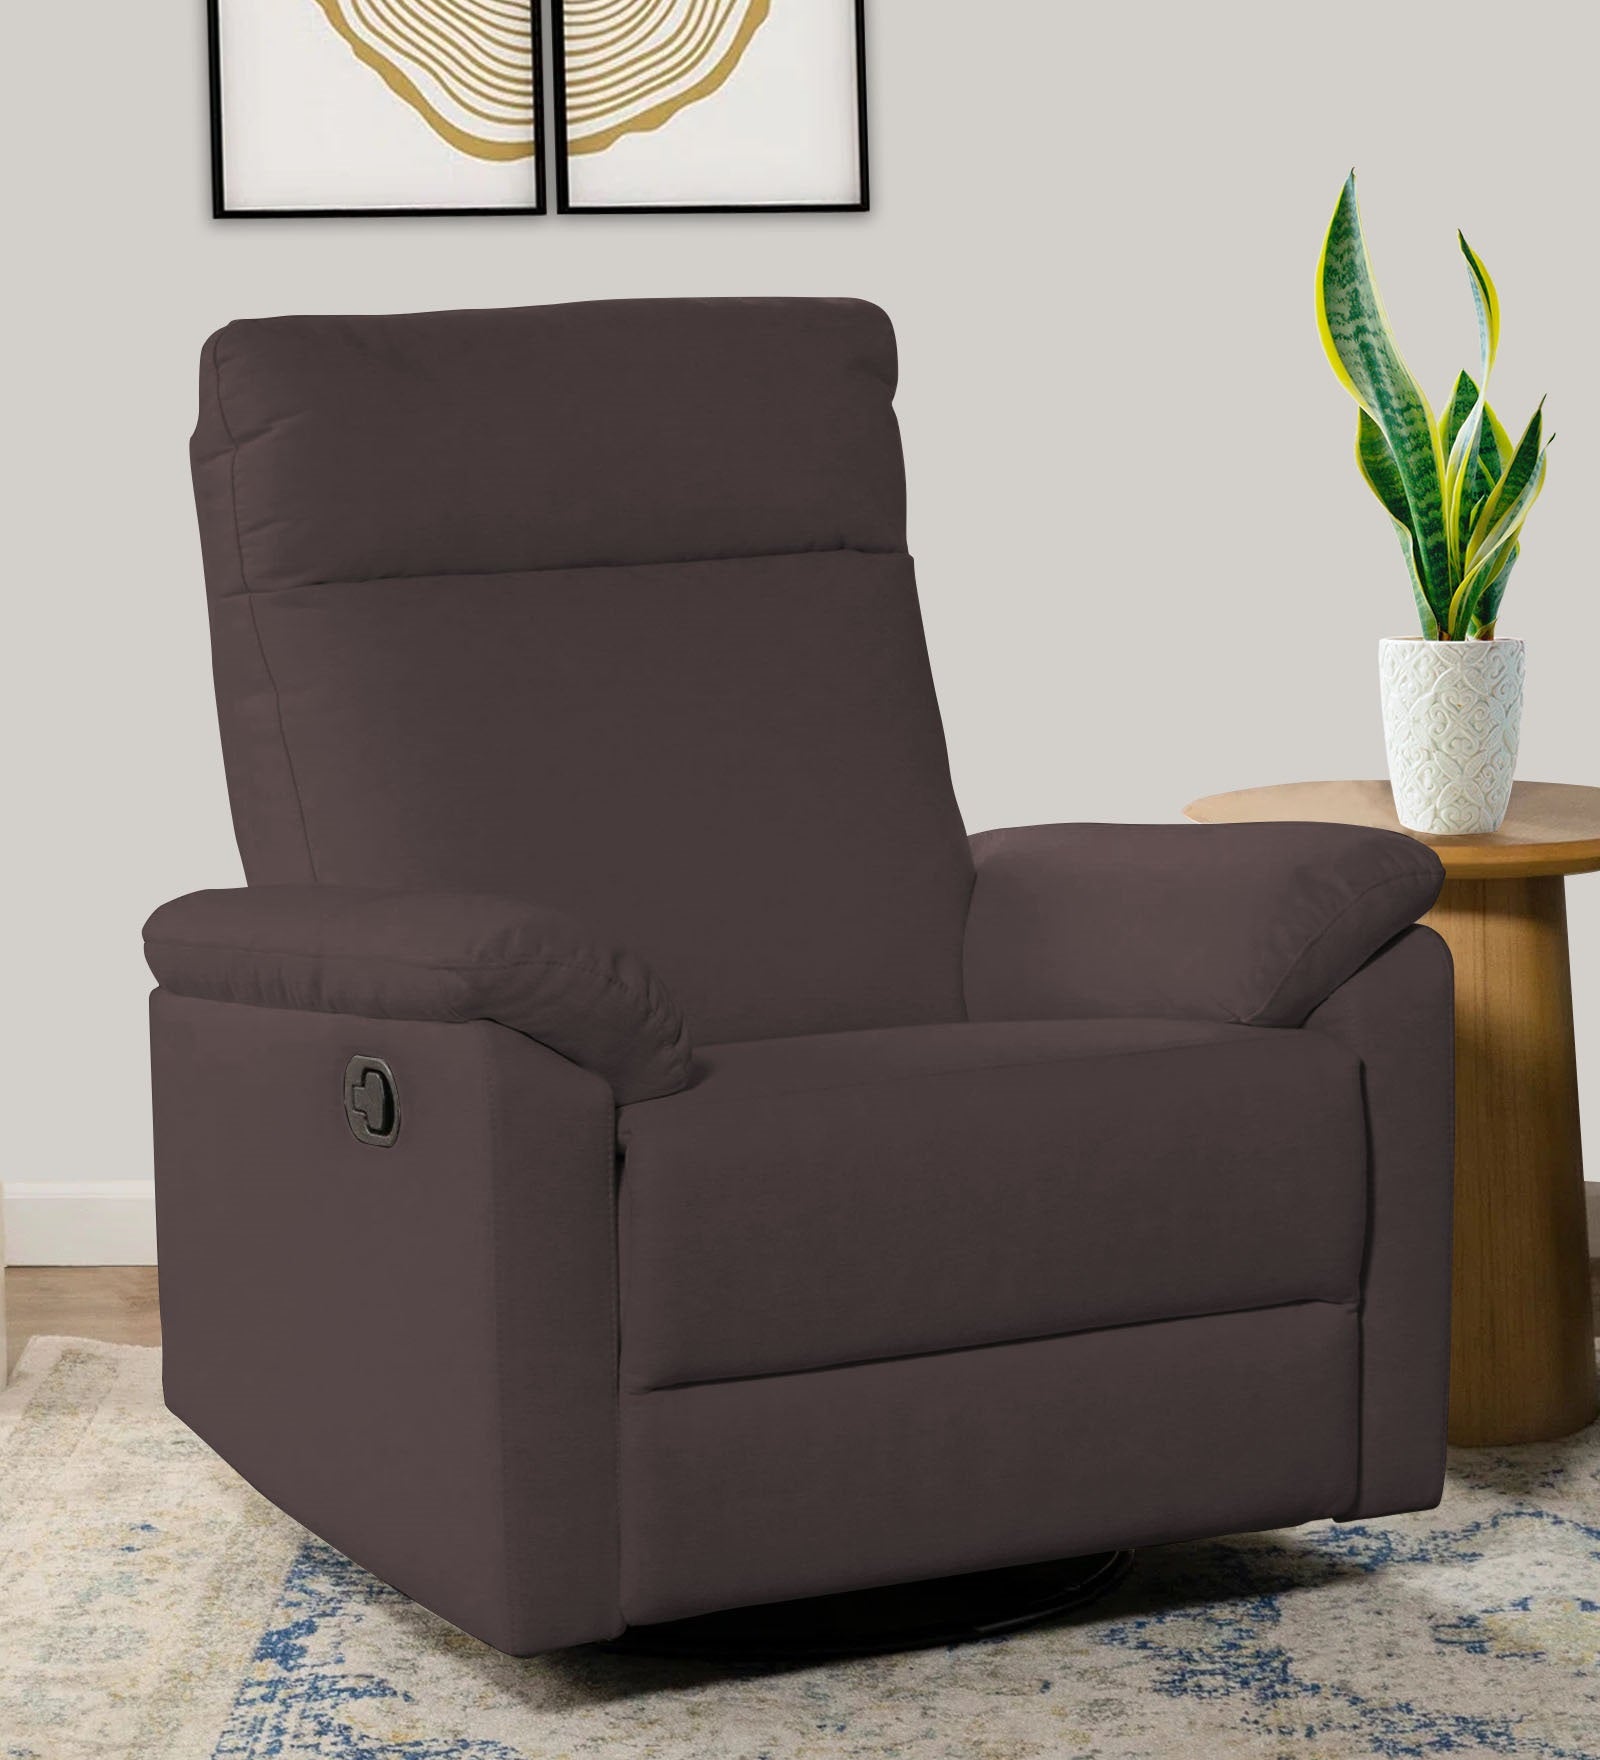 Mandy Fabric Manual 1 Seater Recliner In Mocha Brown Colour